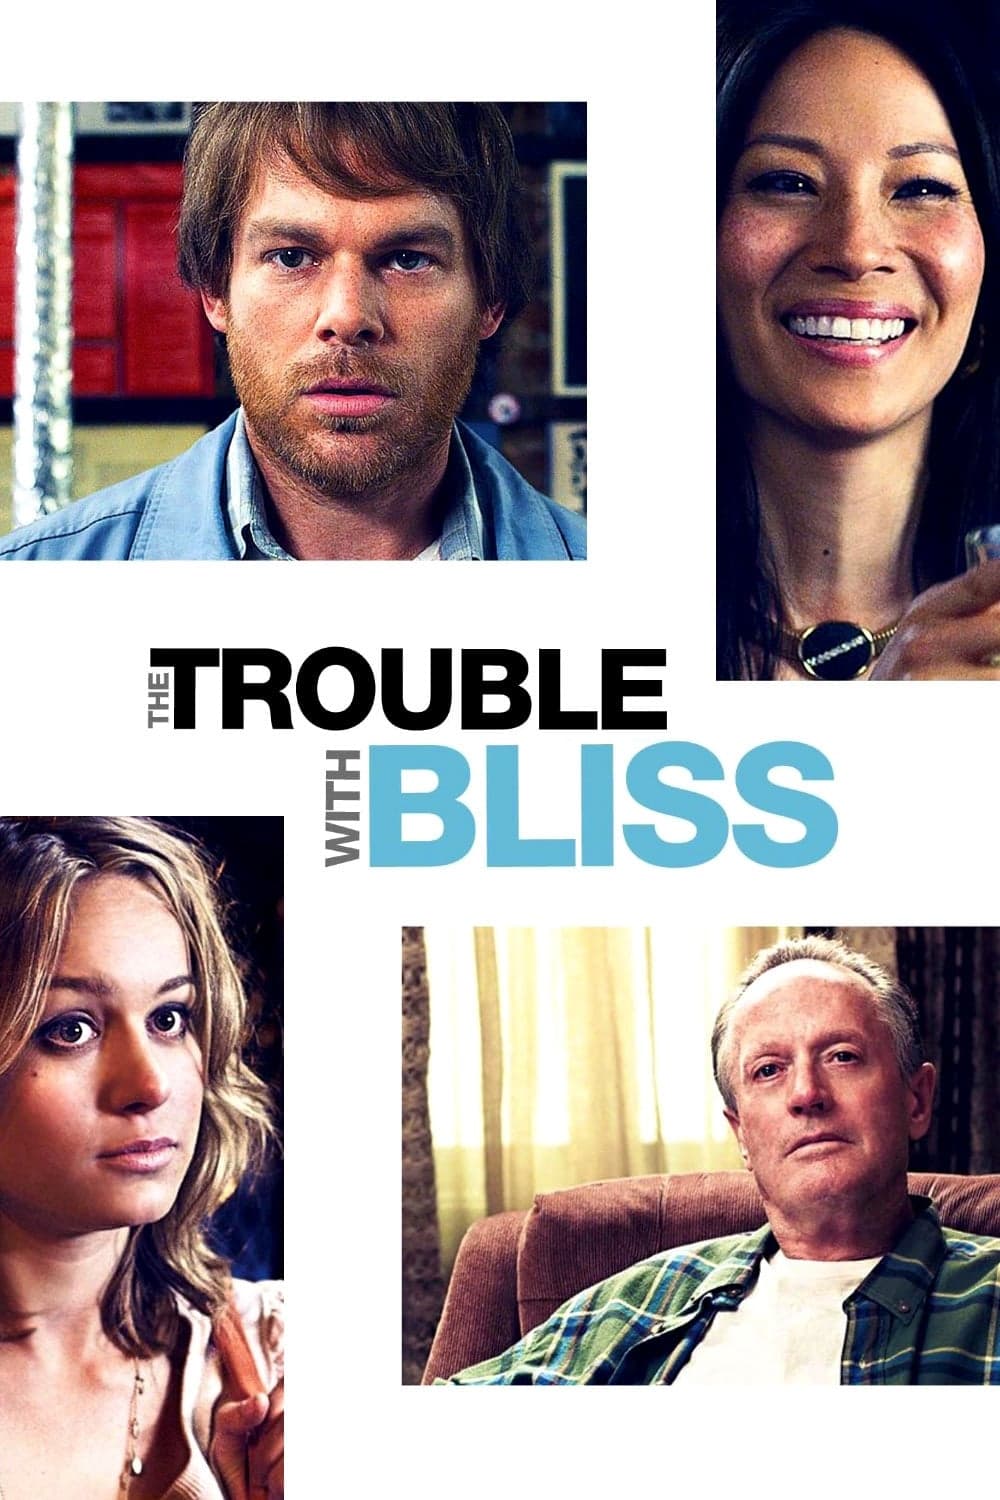 The Trouble with Bliss [Sub-ITA] (2011)